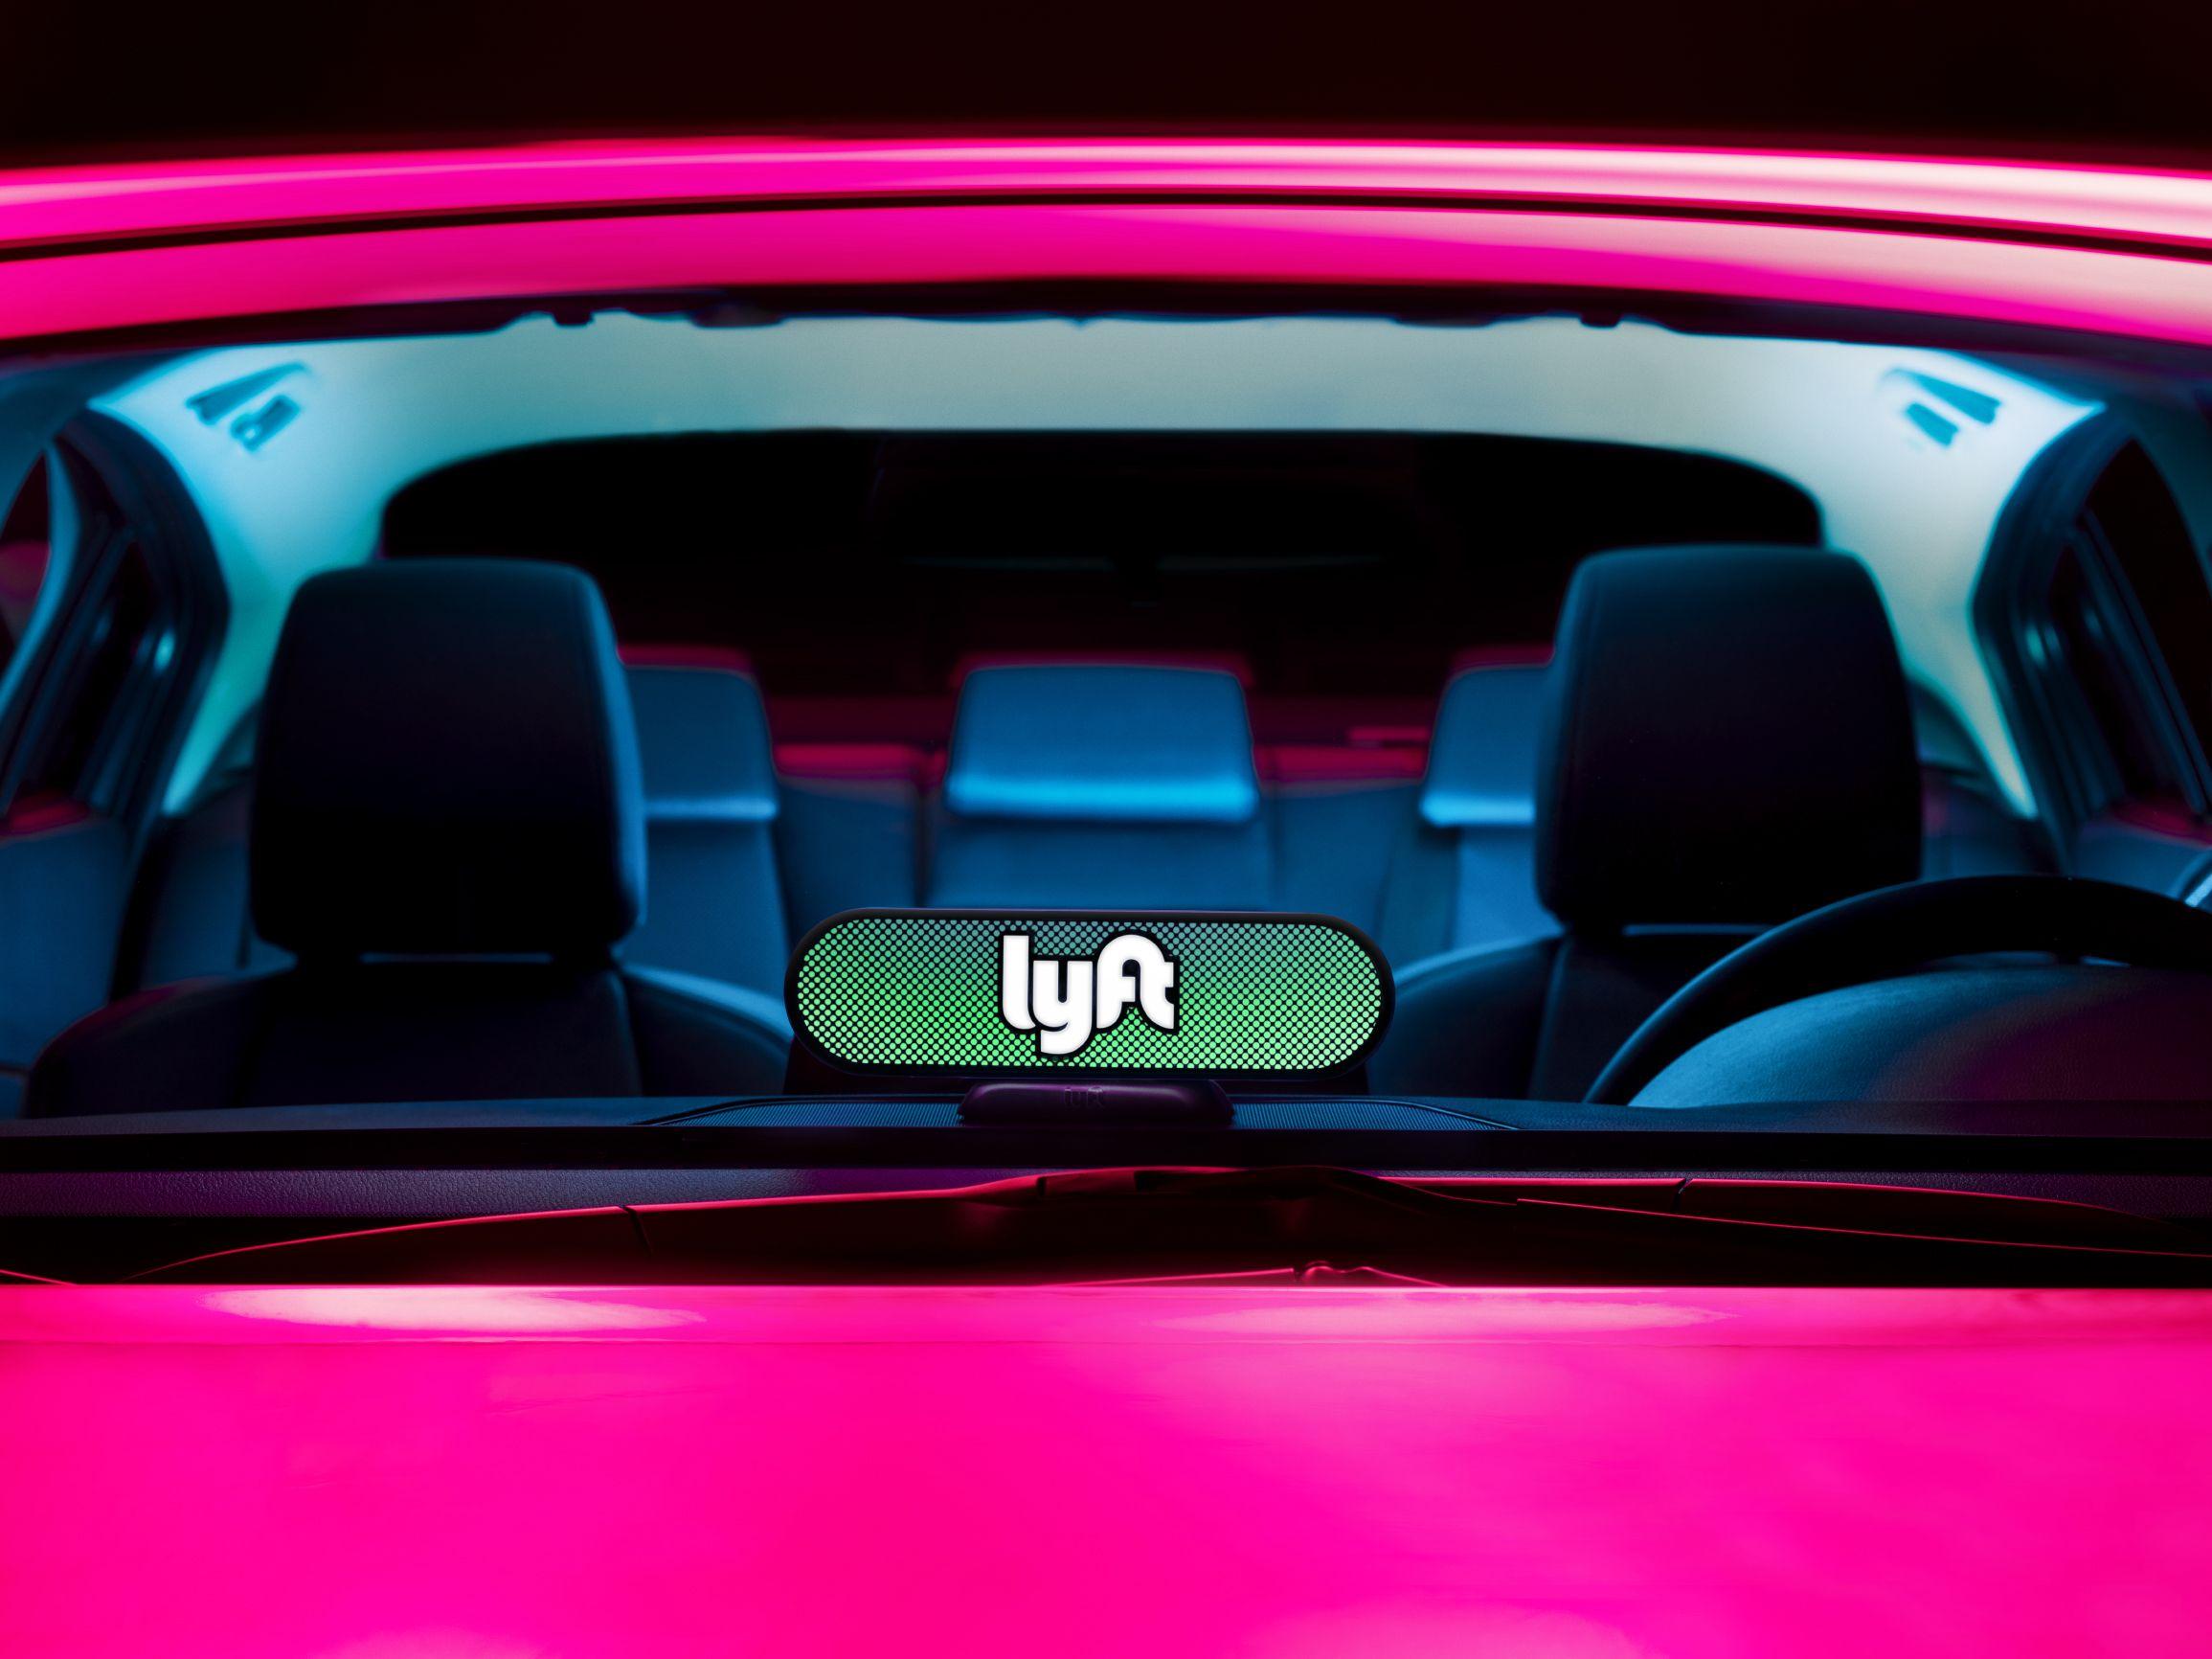 Pink Mustache Logo - Lyft Introduces Amp: Dashboard Light for Drivers | Time